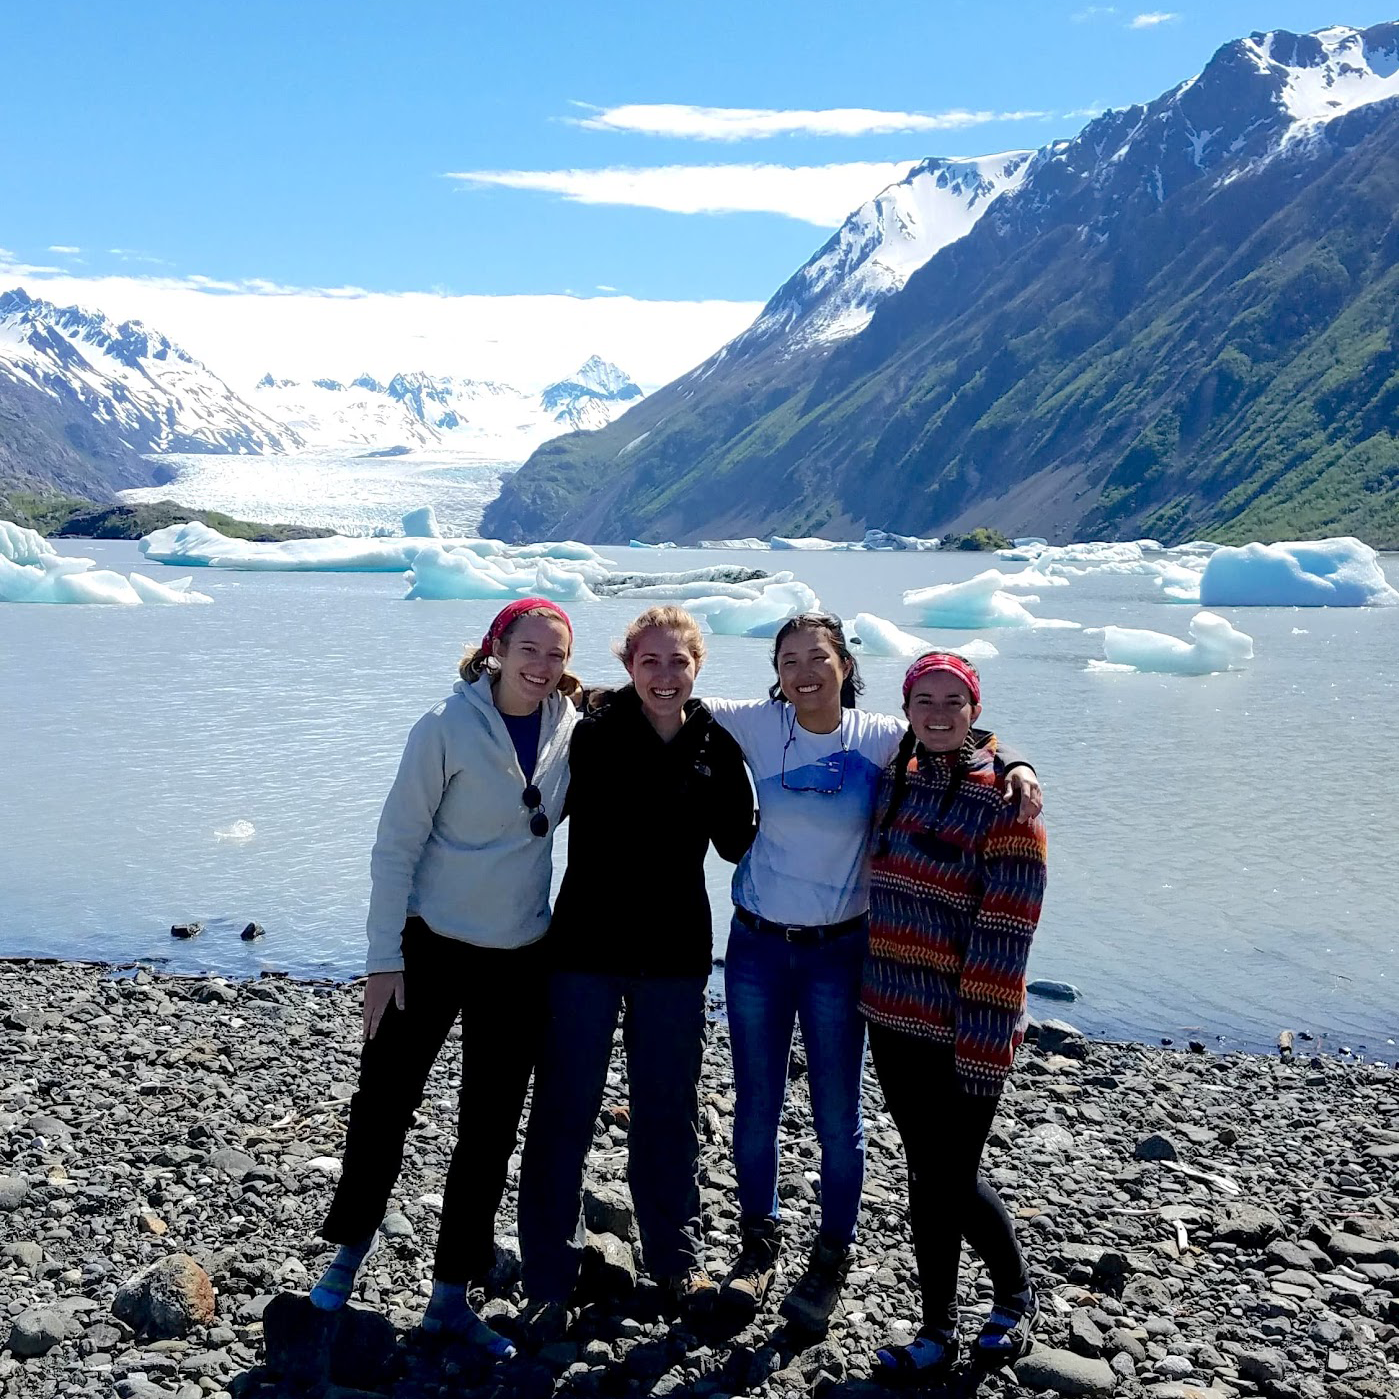 NOAA Scholars (left to right) Adrian Teegarden, Anna Lowien, Ashley Bang and Megan Hazlett are all doing research projects related to the life cycles and habitats of salmon and forage fish in the Kenai Peninsula of Alaska. As you can see, they've been out conducting field work in some of Alaska's most beautiful bays!